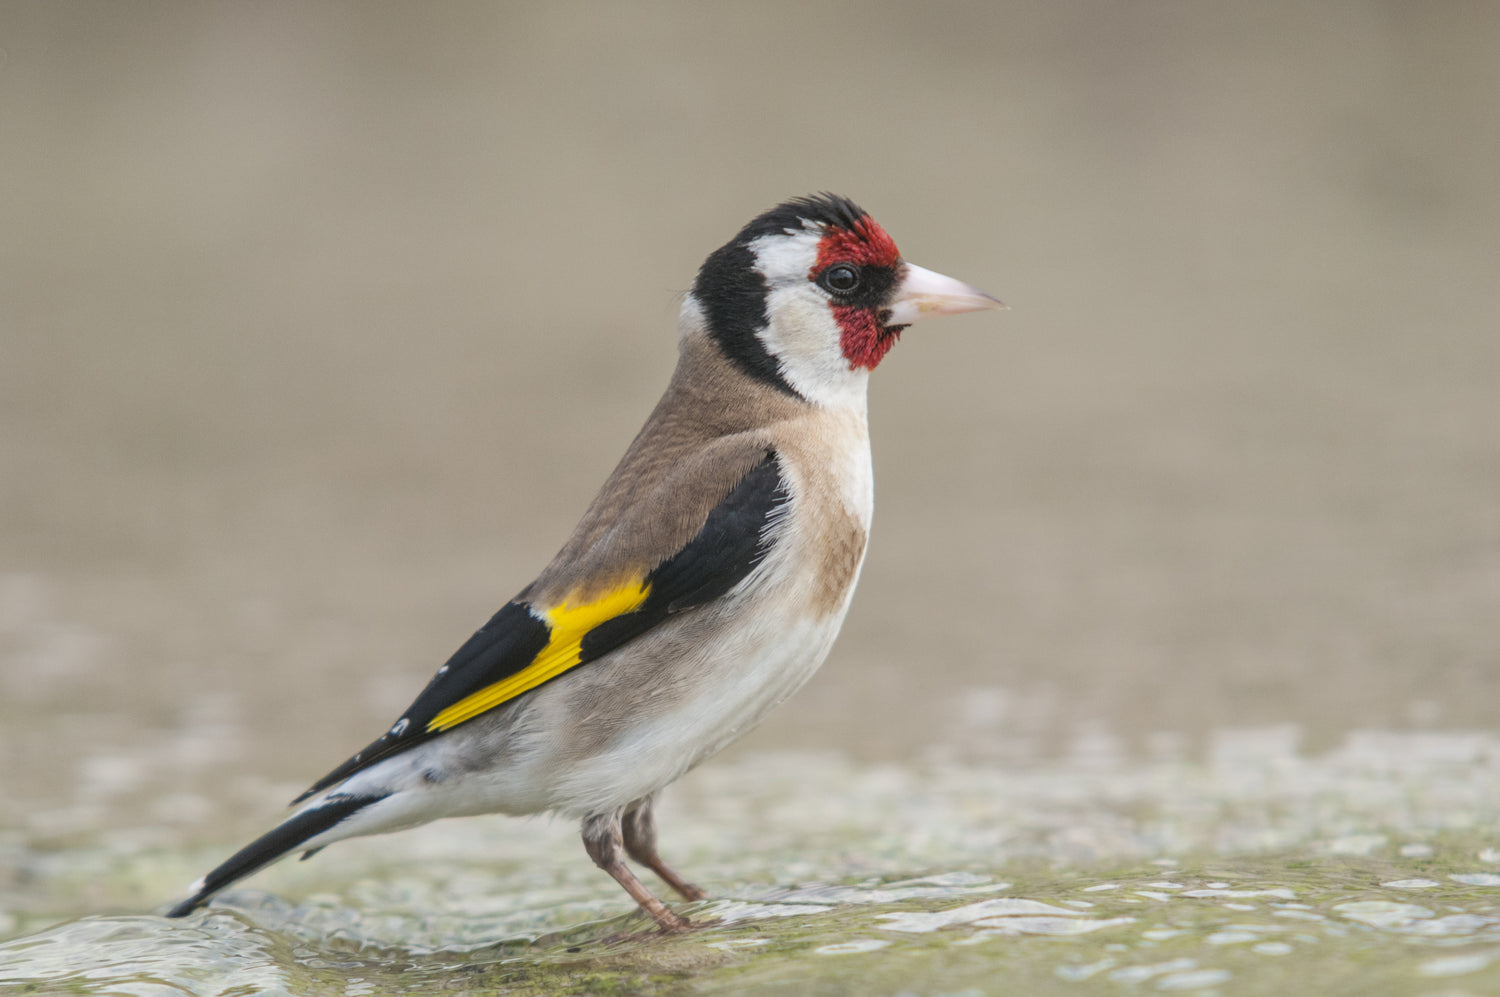 A goldfinch in New Zealand